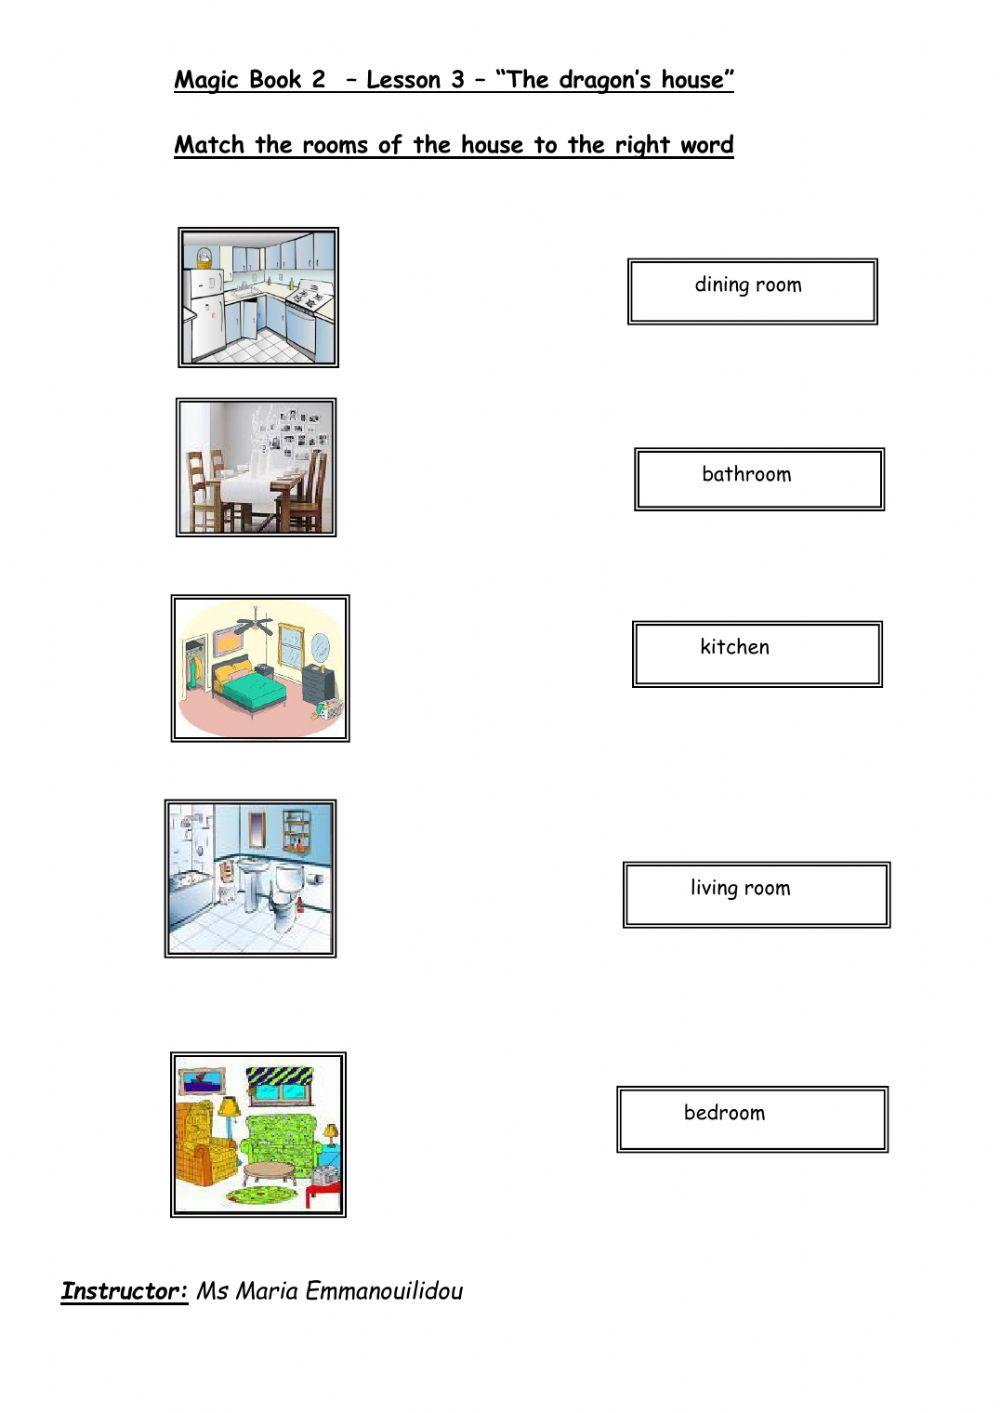 Rooms of the house-Magic book worksheet | Live Worksheets